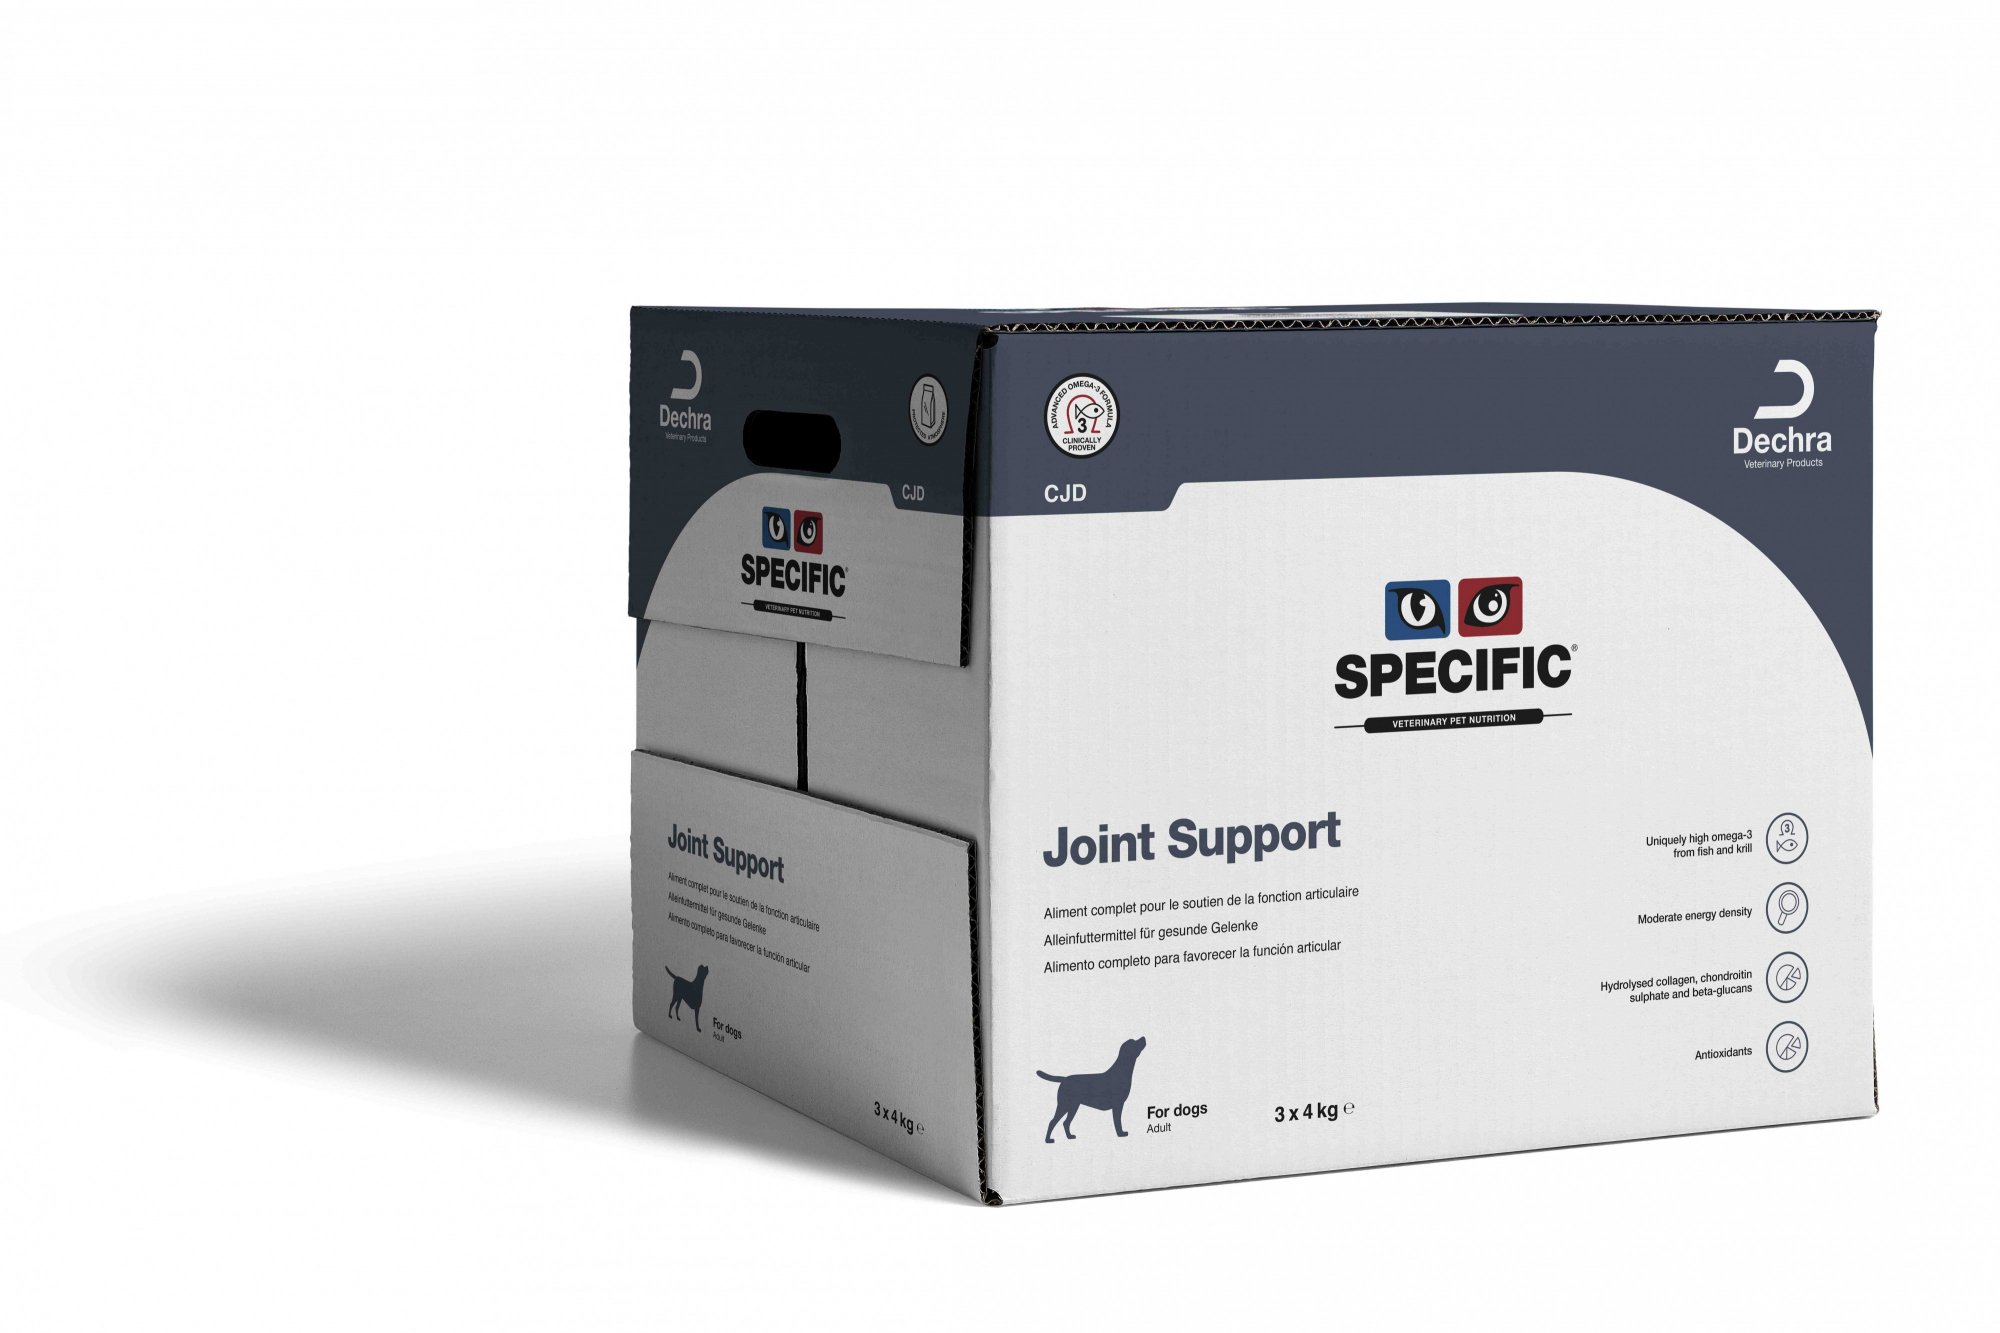 SPECIFIC CJD Joint Support